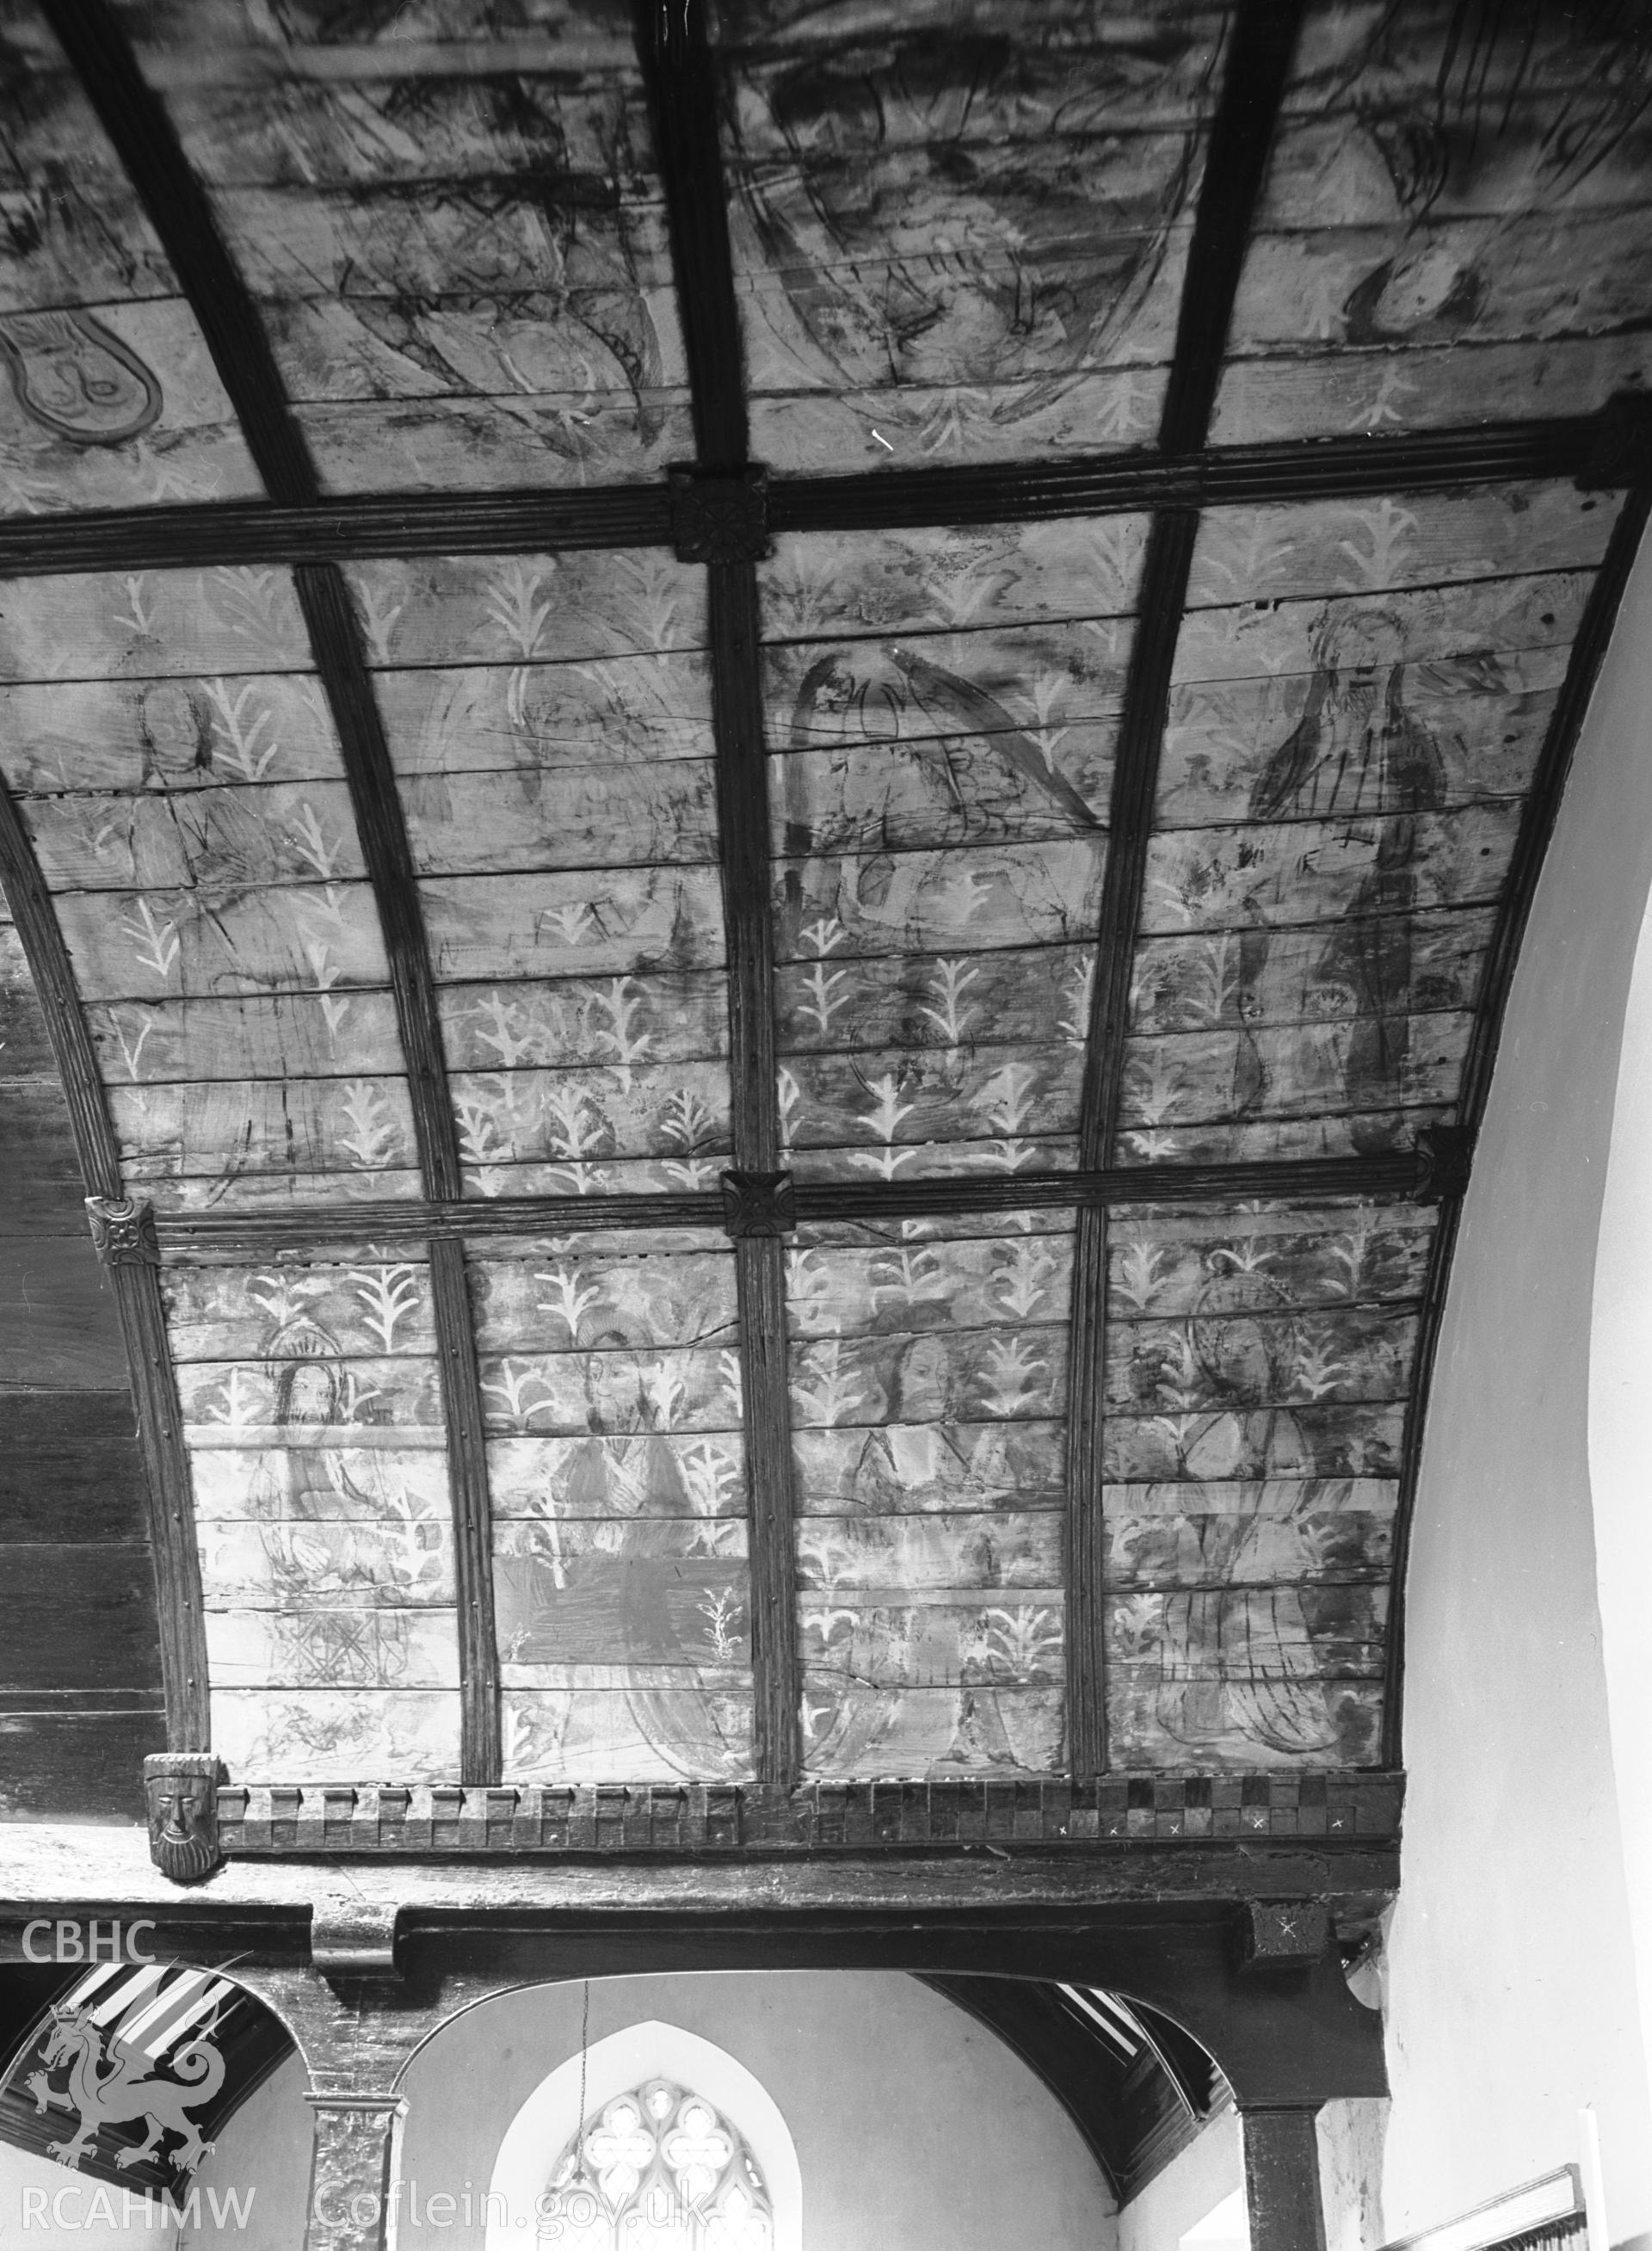 Interior view showing northern panels of the painted ceiling.